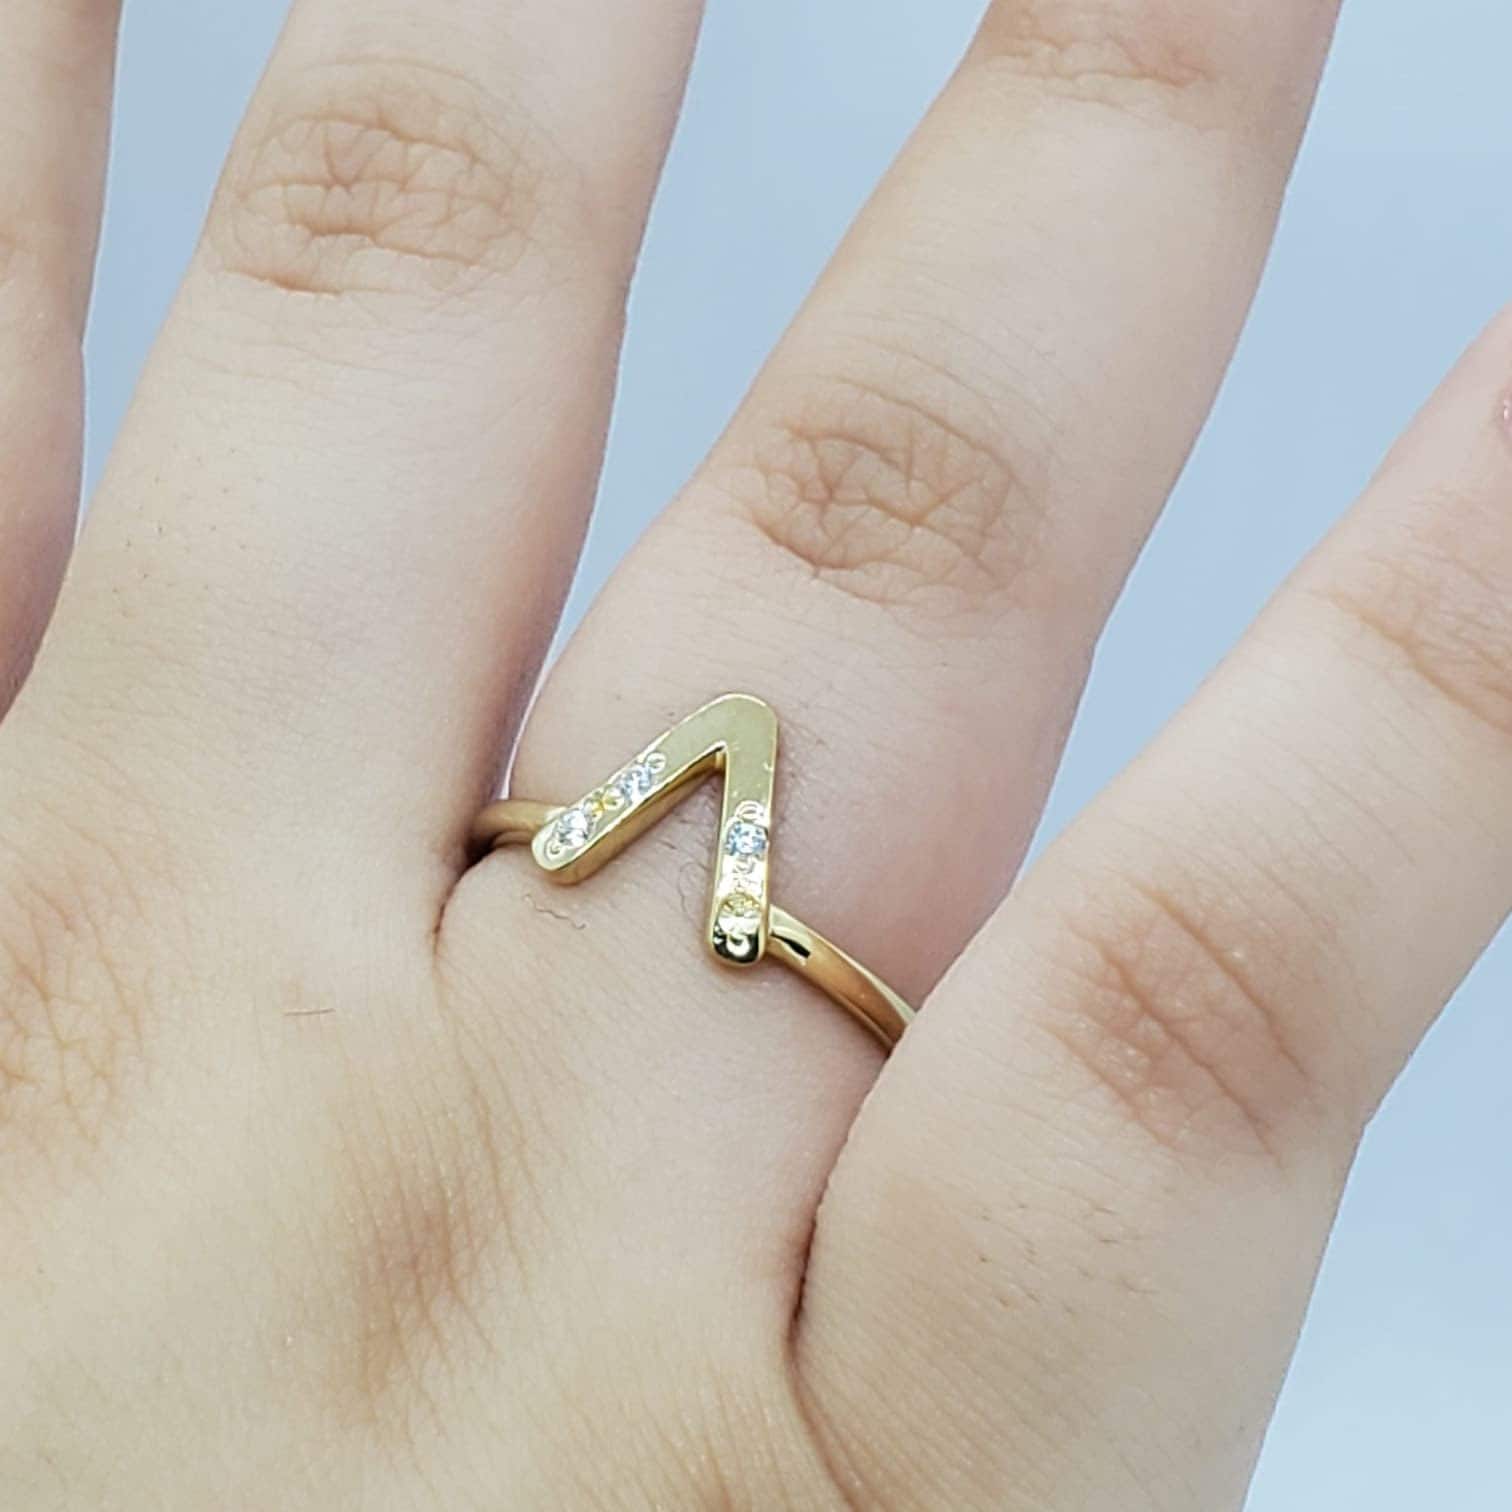 Adjustable Initial Ring - Annabella Jewelers